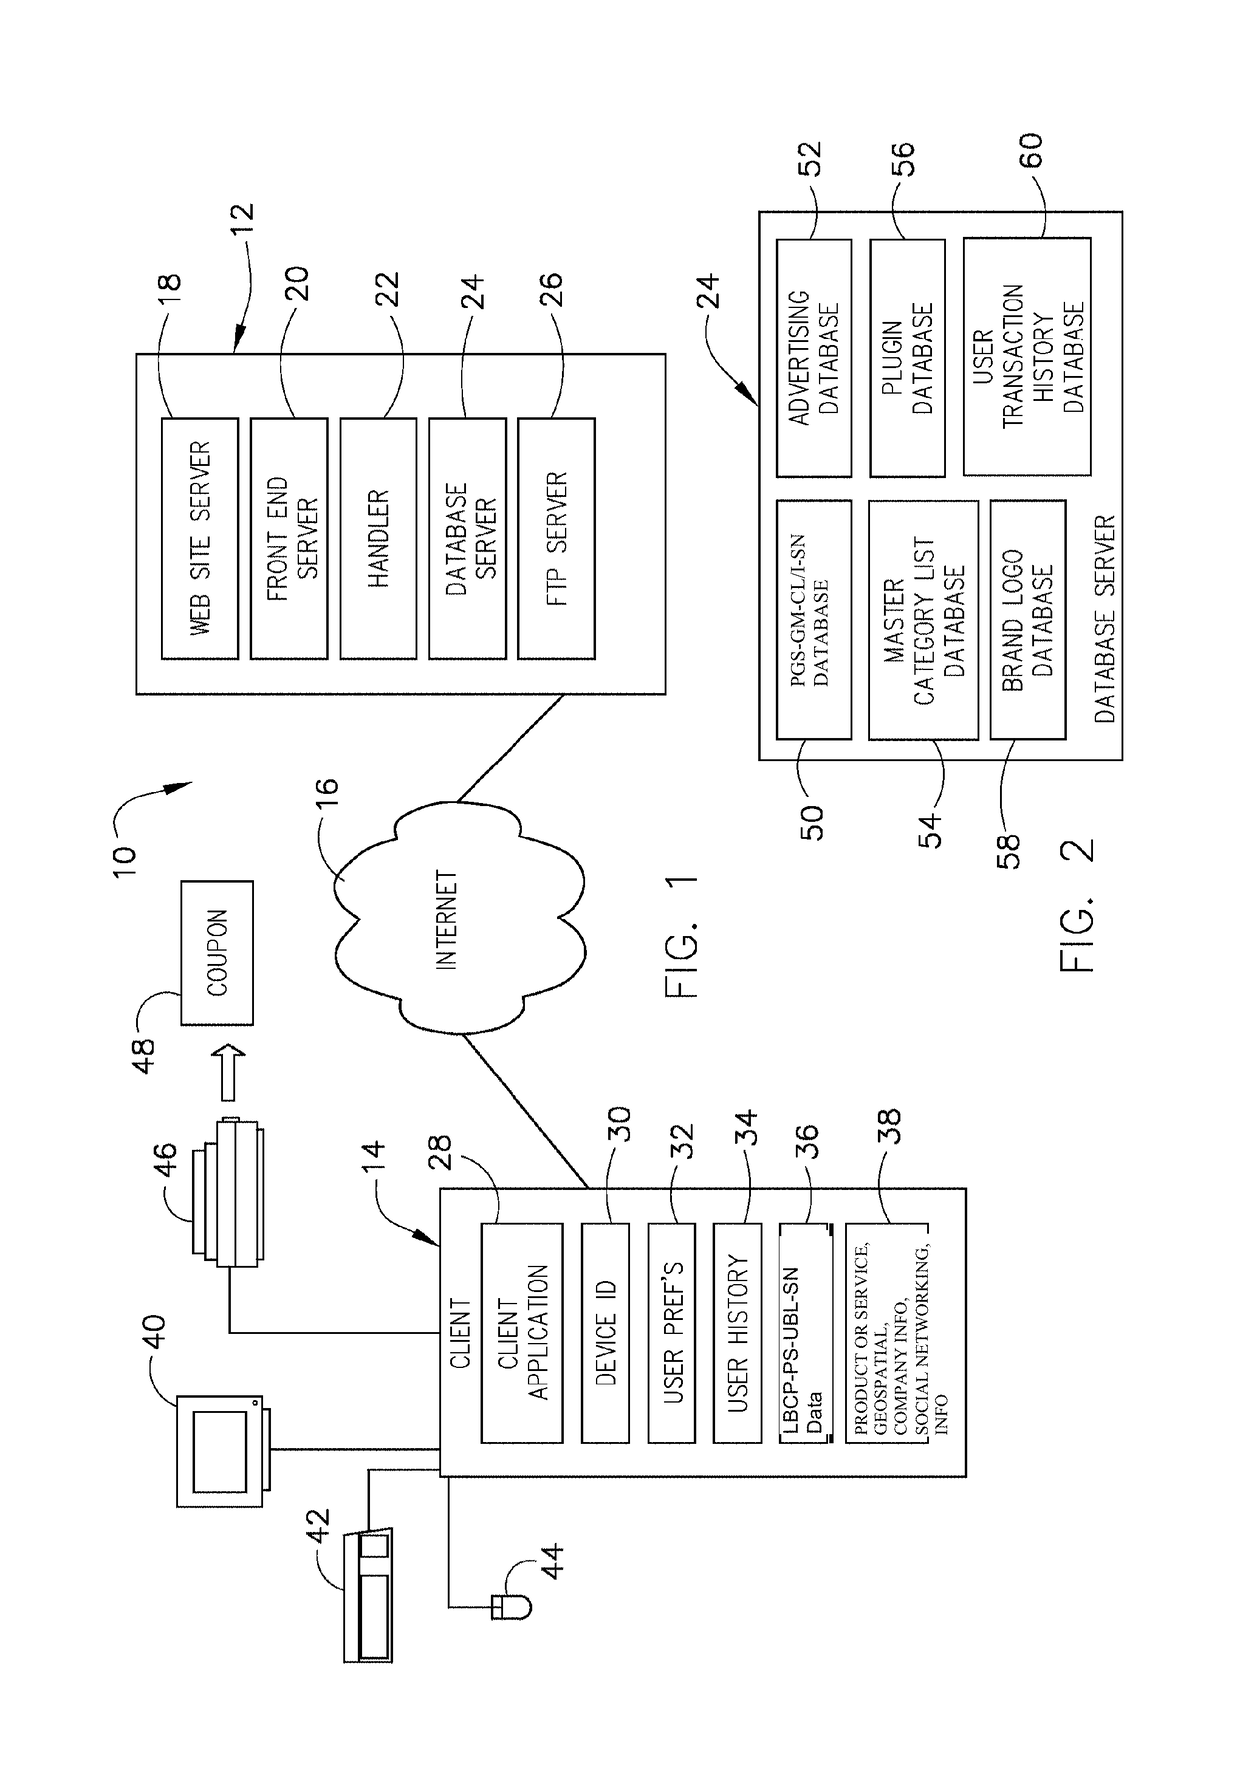 System and method for using impressions tracking and analysis, location information, 2D and 3D mapping, mobile mapping, social media, and user behavior and information for generating mobile and internet posted promotions or offers for, and/or sales of, products and/or services